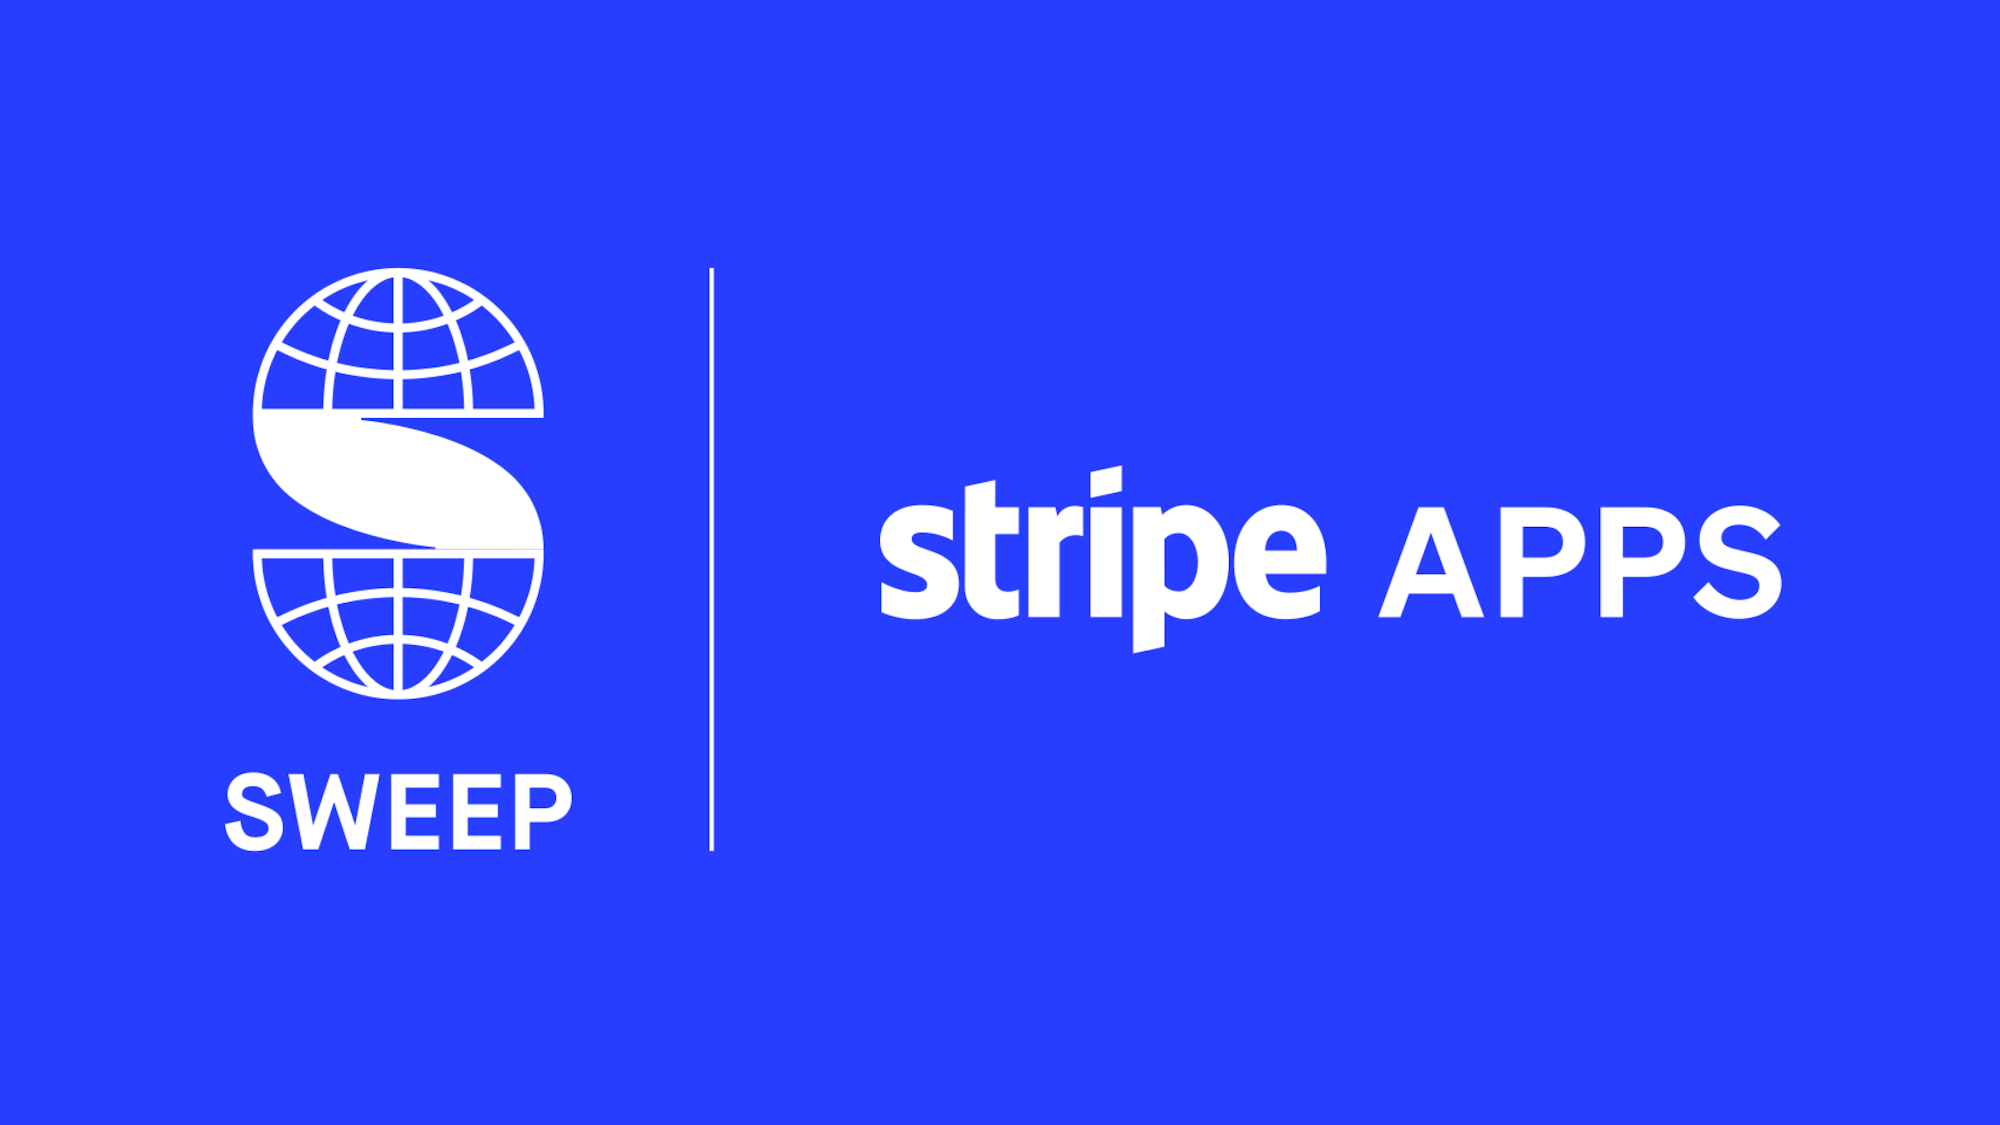 We’re live in the new Stripe App Marketplace!